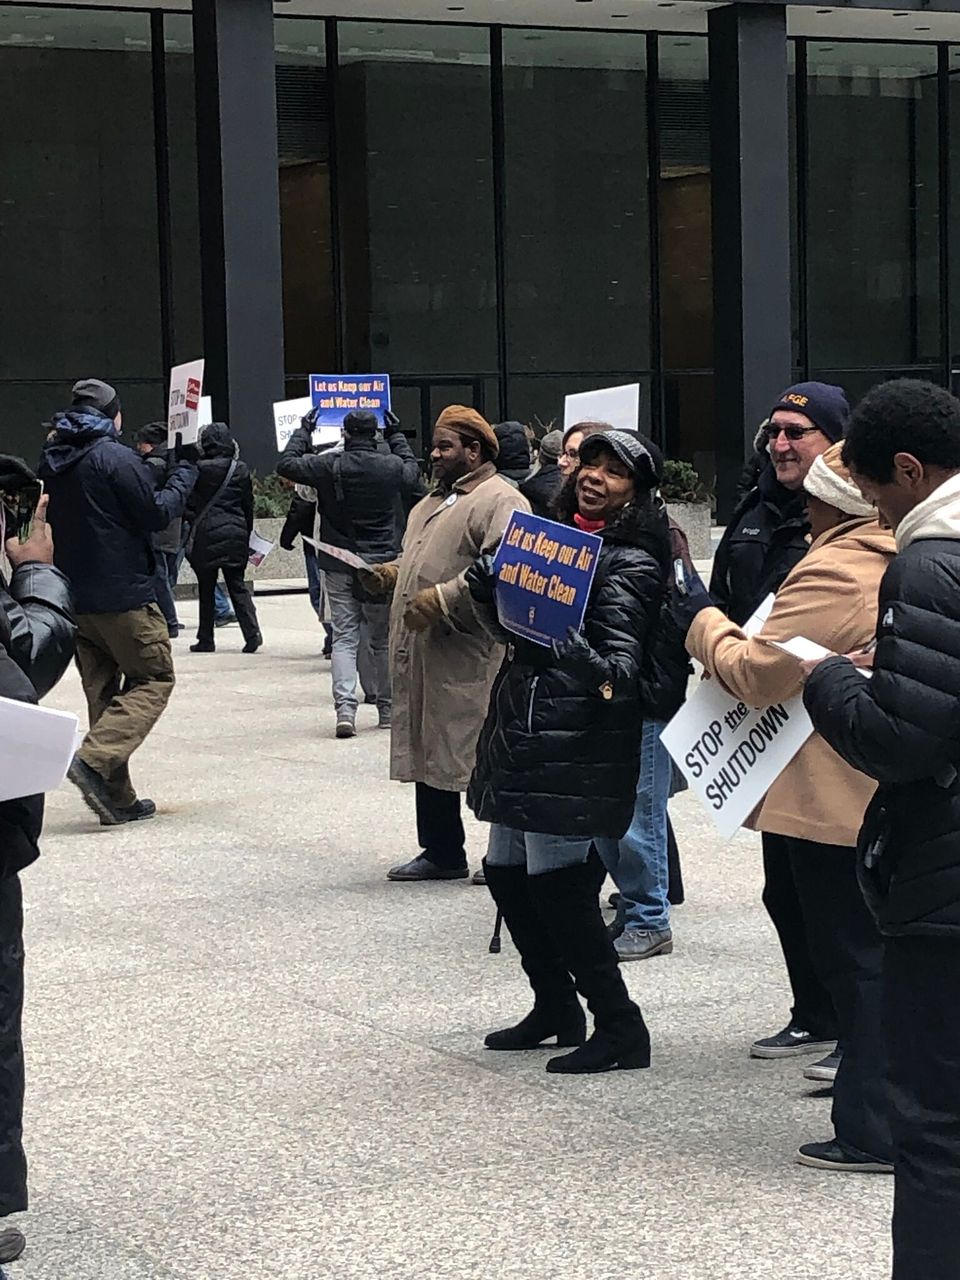 Picketers in downtown Chicago